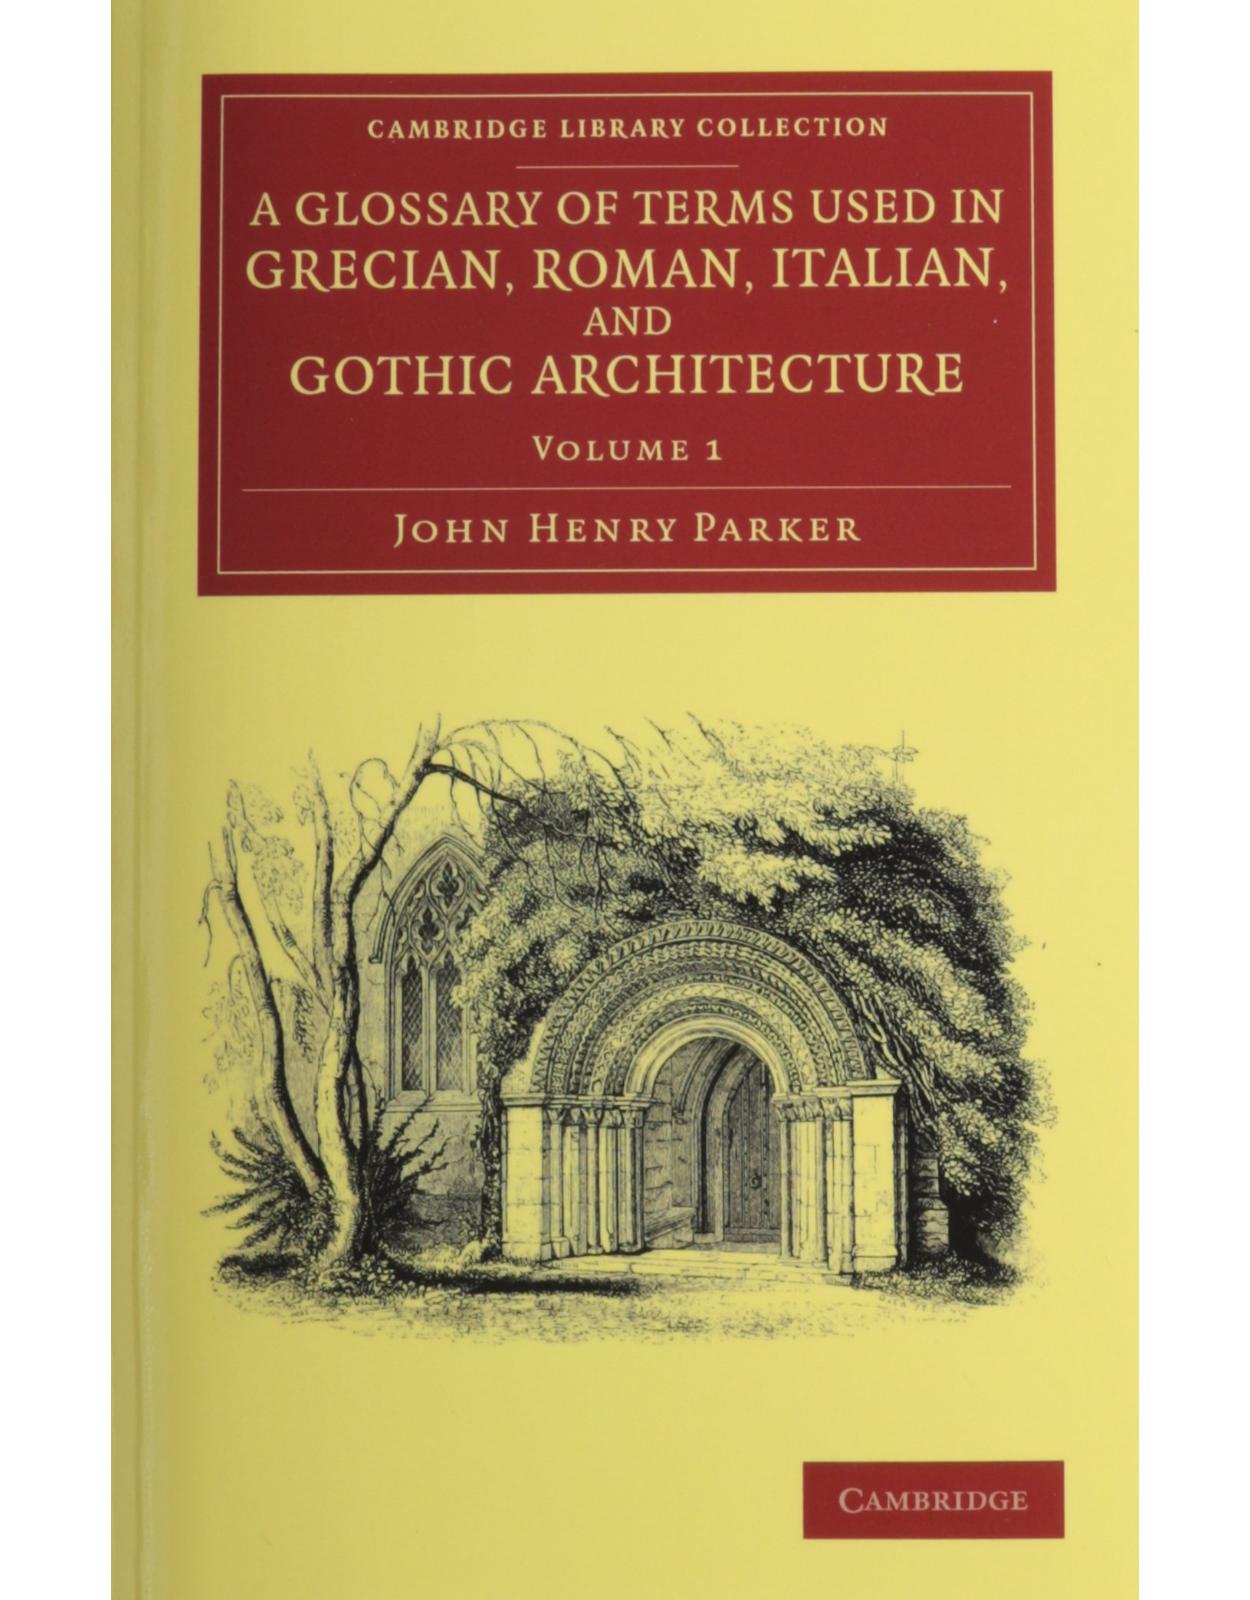 A Glossary of Terms Used in Grecian, Roman, Italian, and Gothic Architecture 2 Volume Set (Cambridge Library Collection - Art and Architecture)